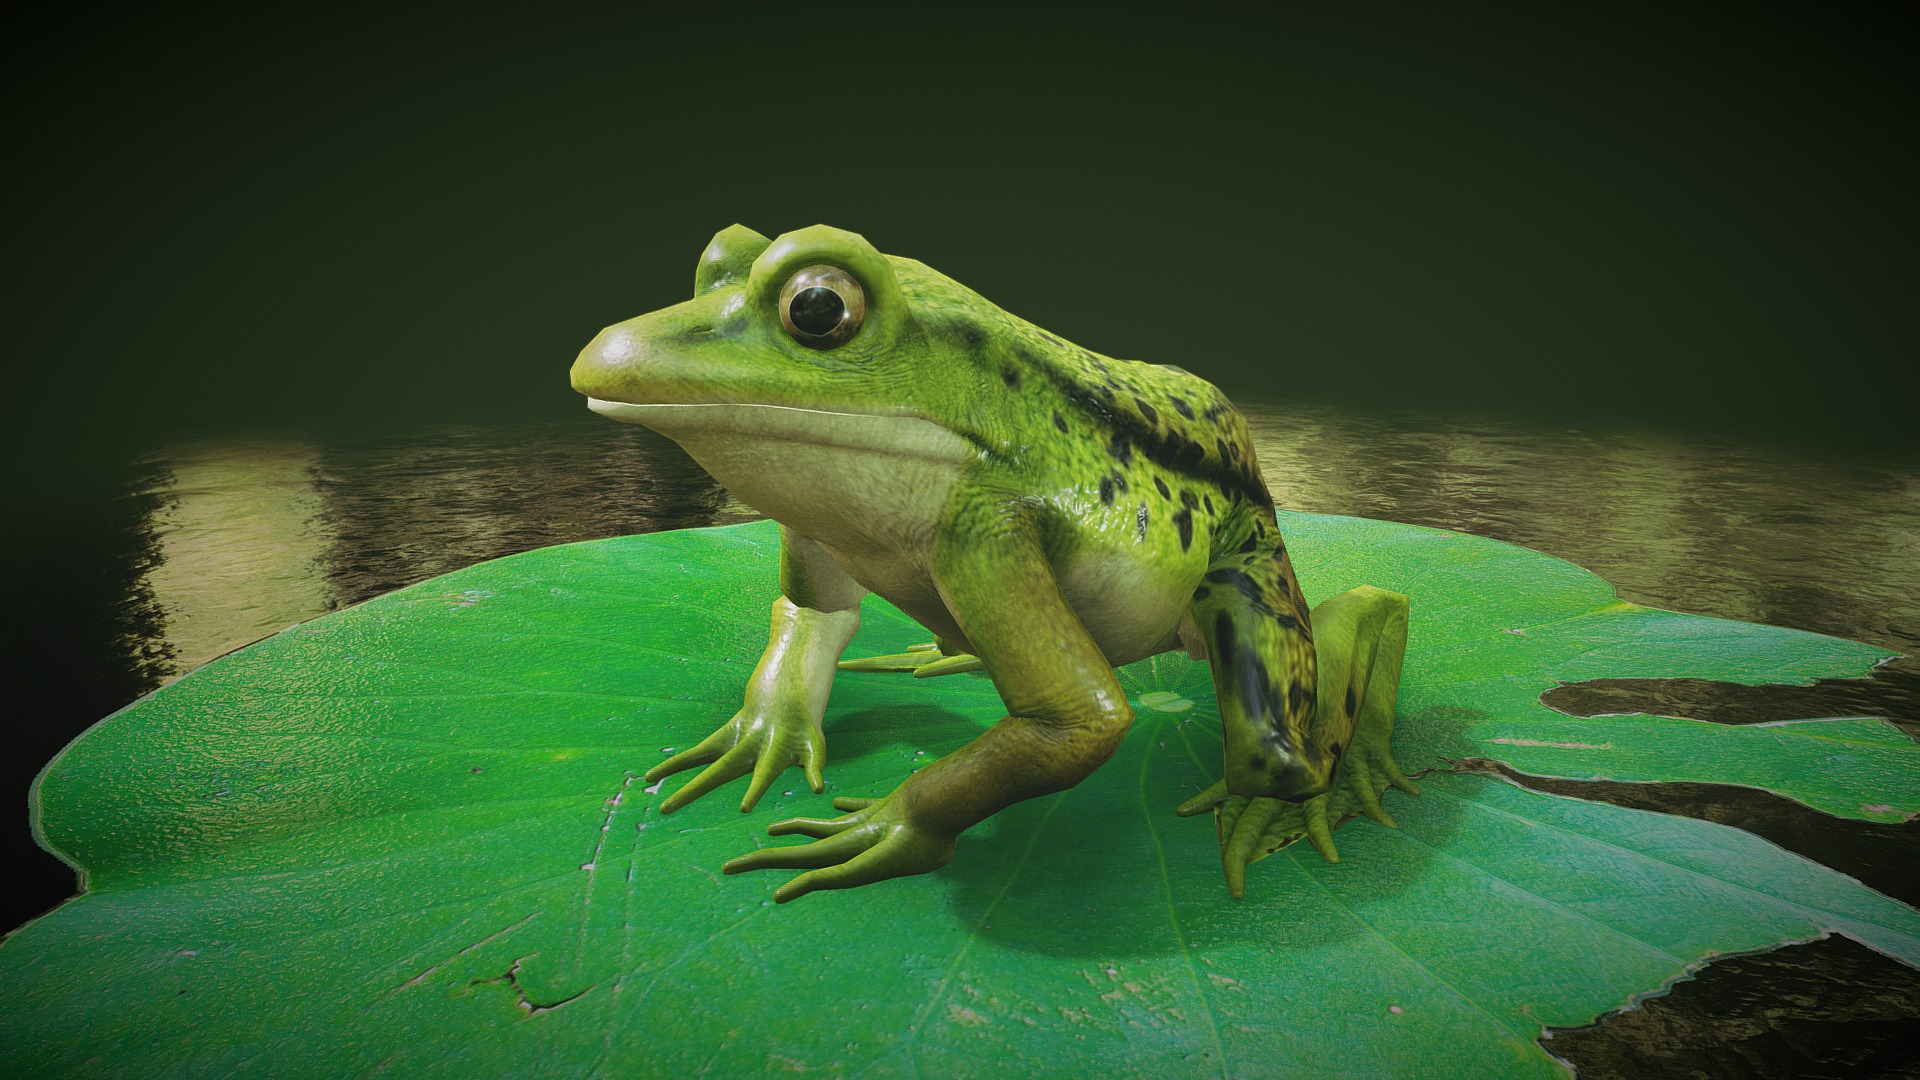 3D model Pelophylax Lessonae - This is a 3D model of the Pelophylax Lessonae. The 3D model is about a frog on a leaf.